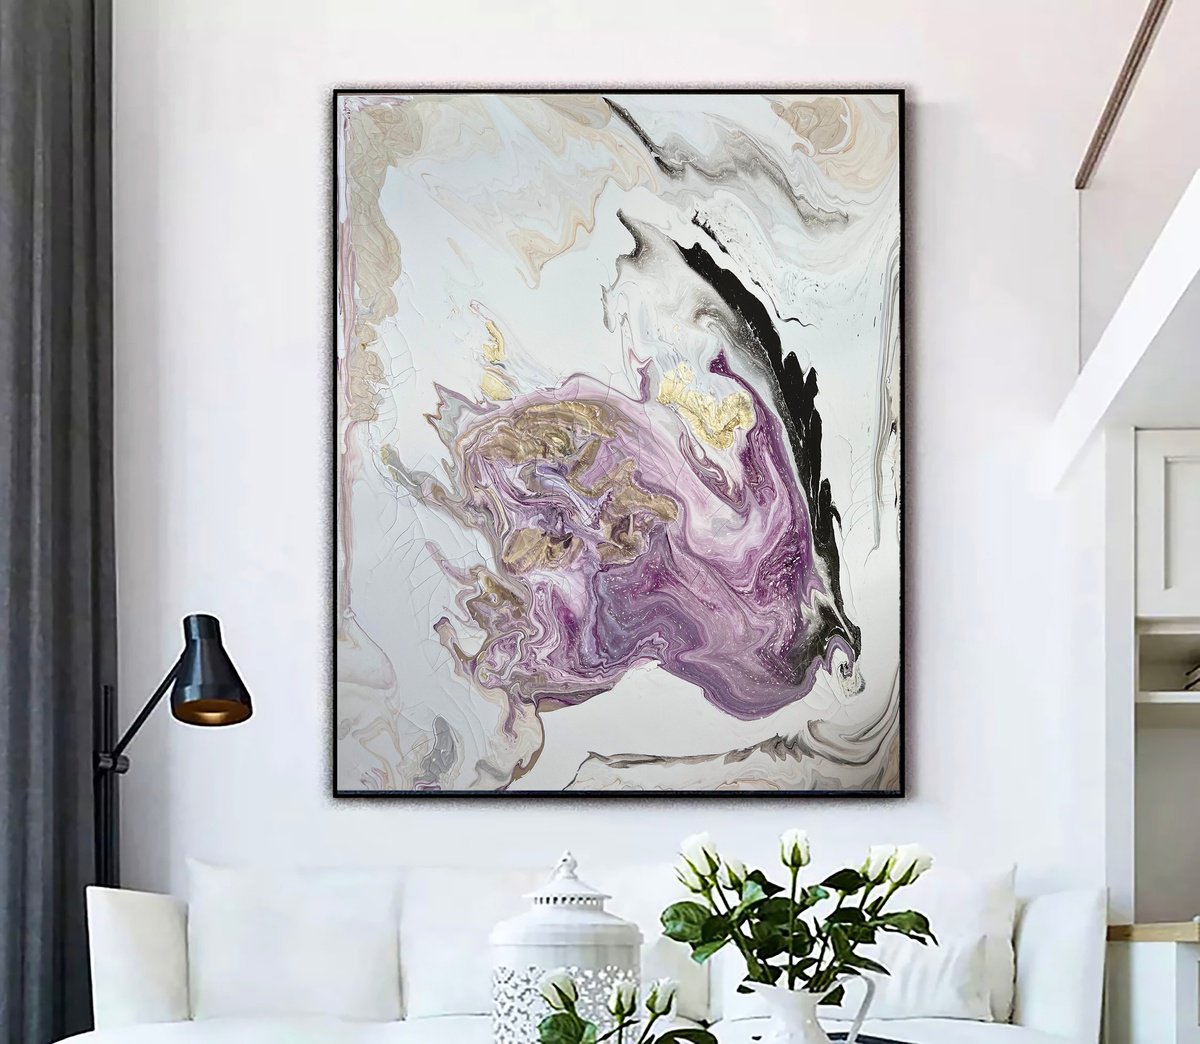 HAPPINESS IS WITHIN - Abstract Happy painting. Happy wall painting. by Marina Skromova